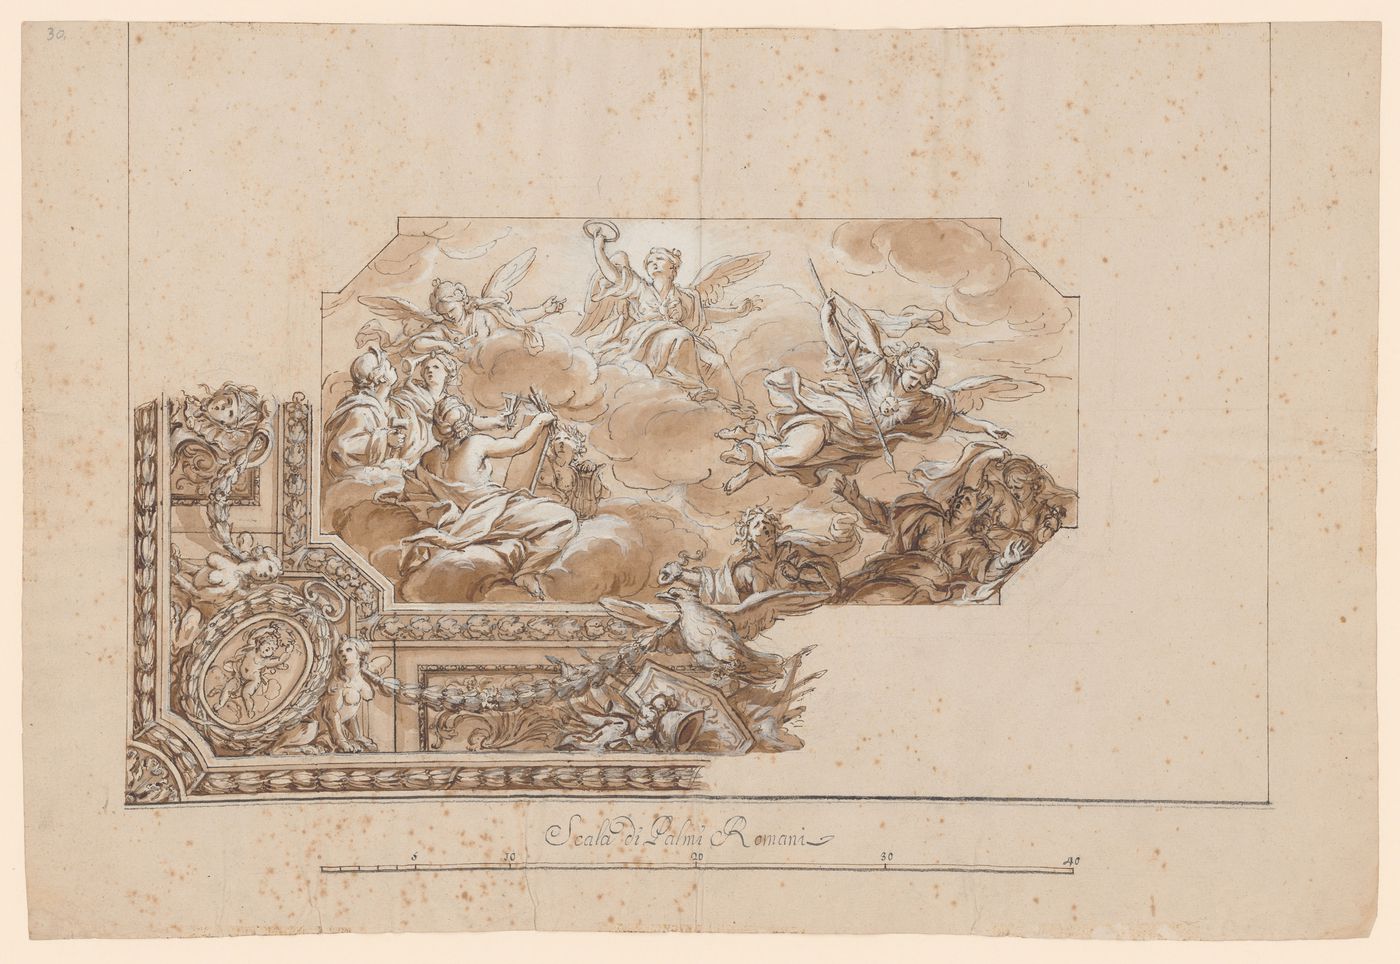 Unfinished plan for a decorated ceiling, including an allegory of divine wisdom and the arts